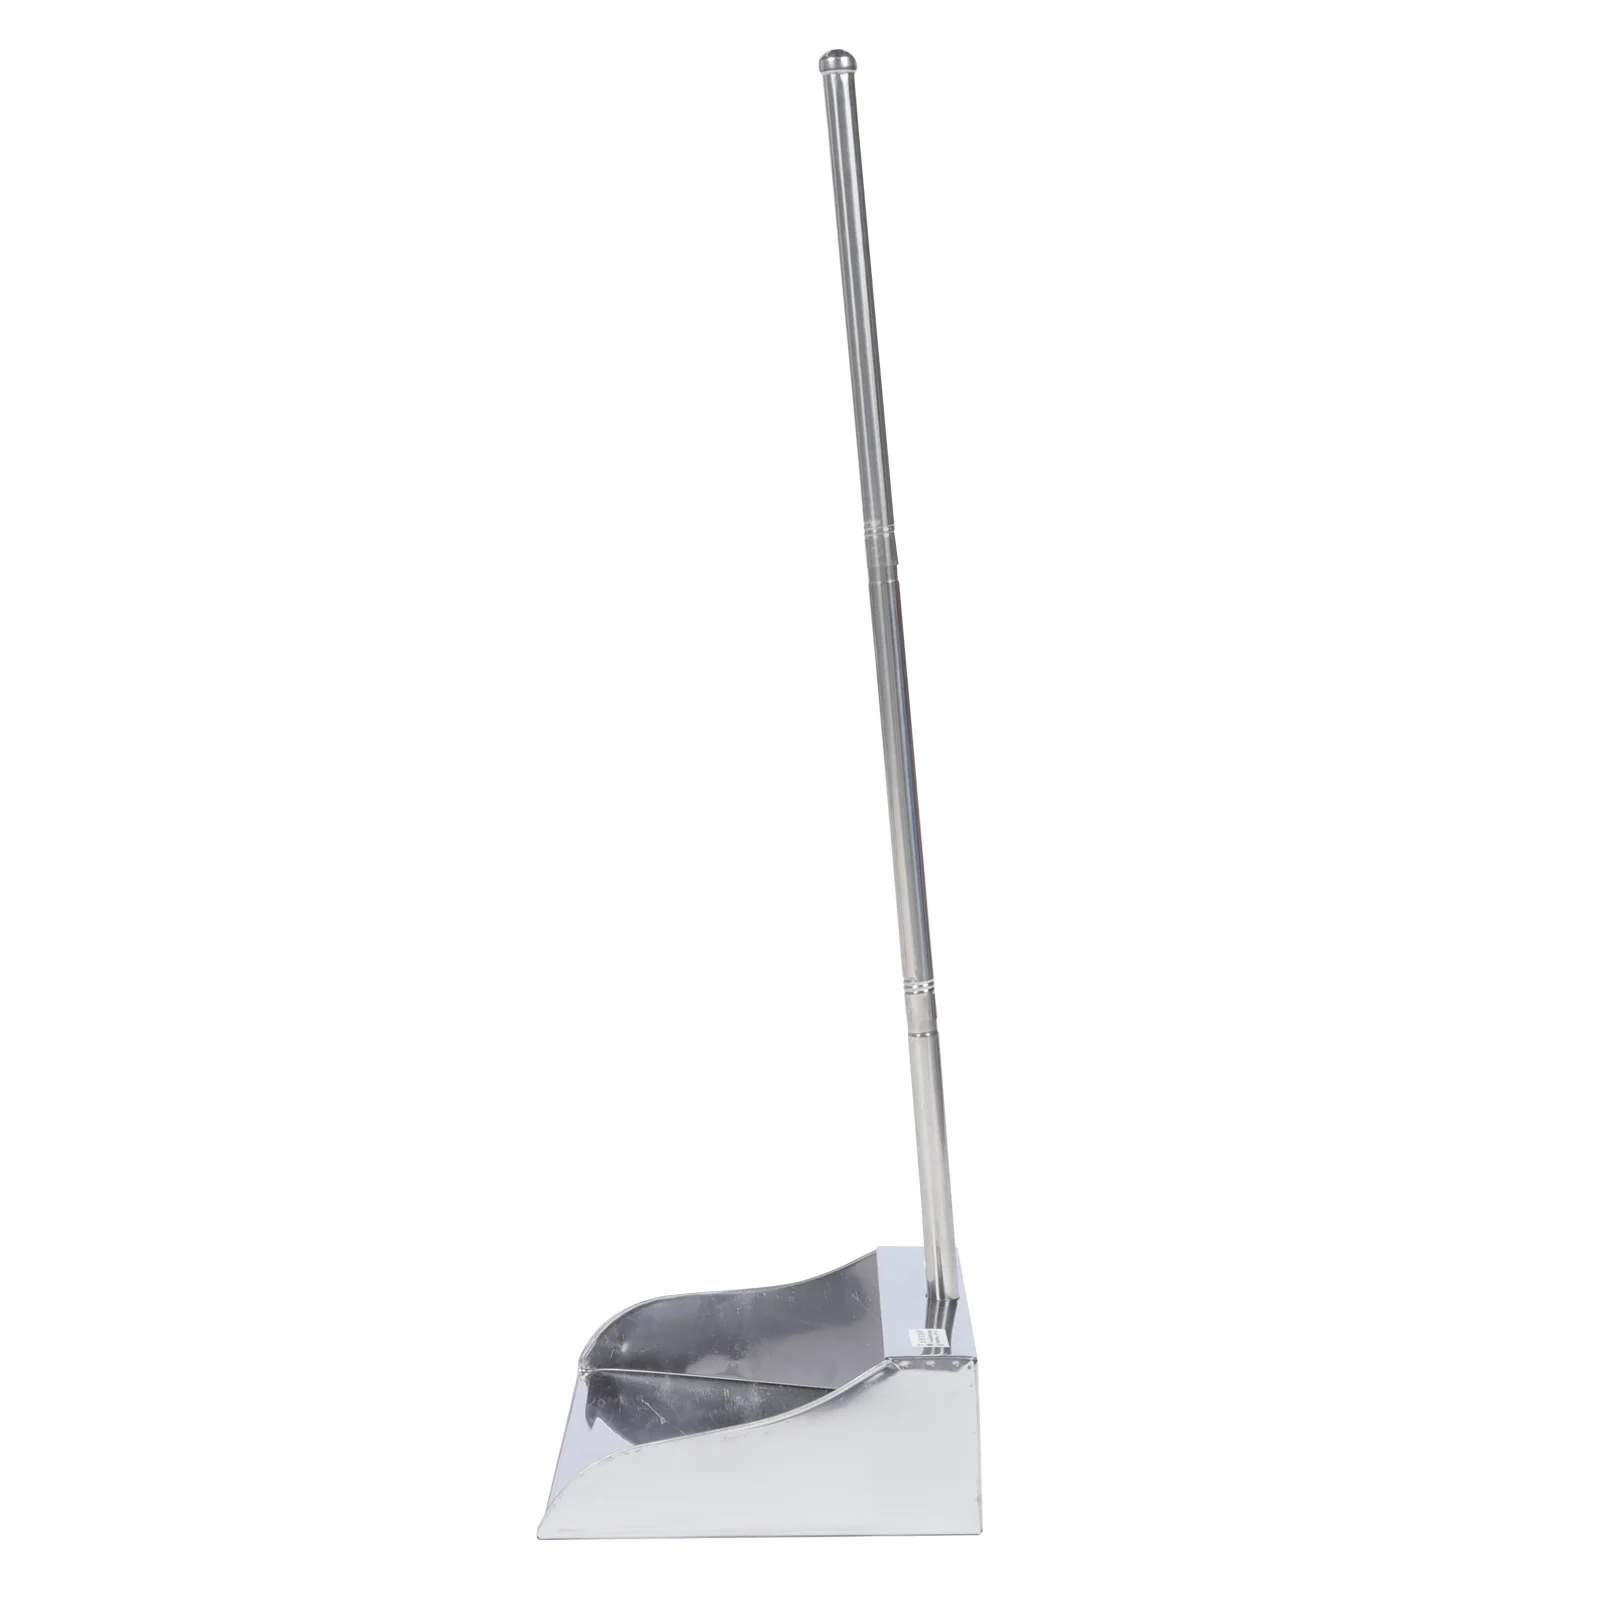 

Dustpan Pan Handle Cleaning Metal Upright Dustpans Pans Stainless Broom Steel Kitchen Garbage Handled Up Stand Trash Heavy Duty